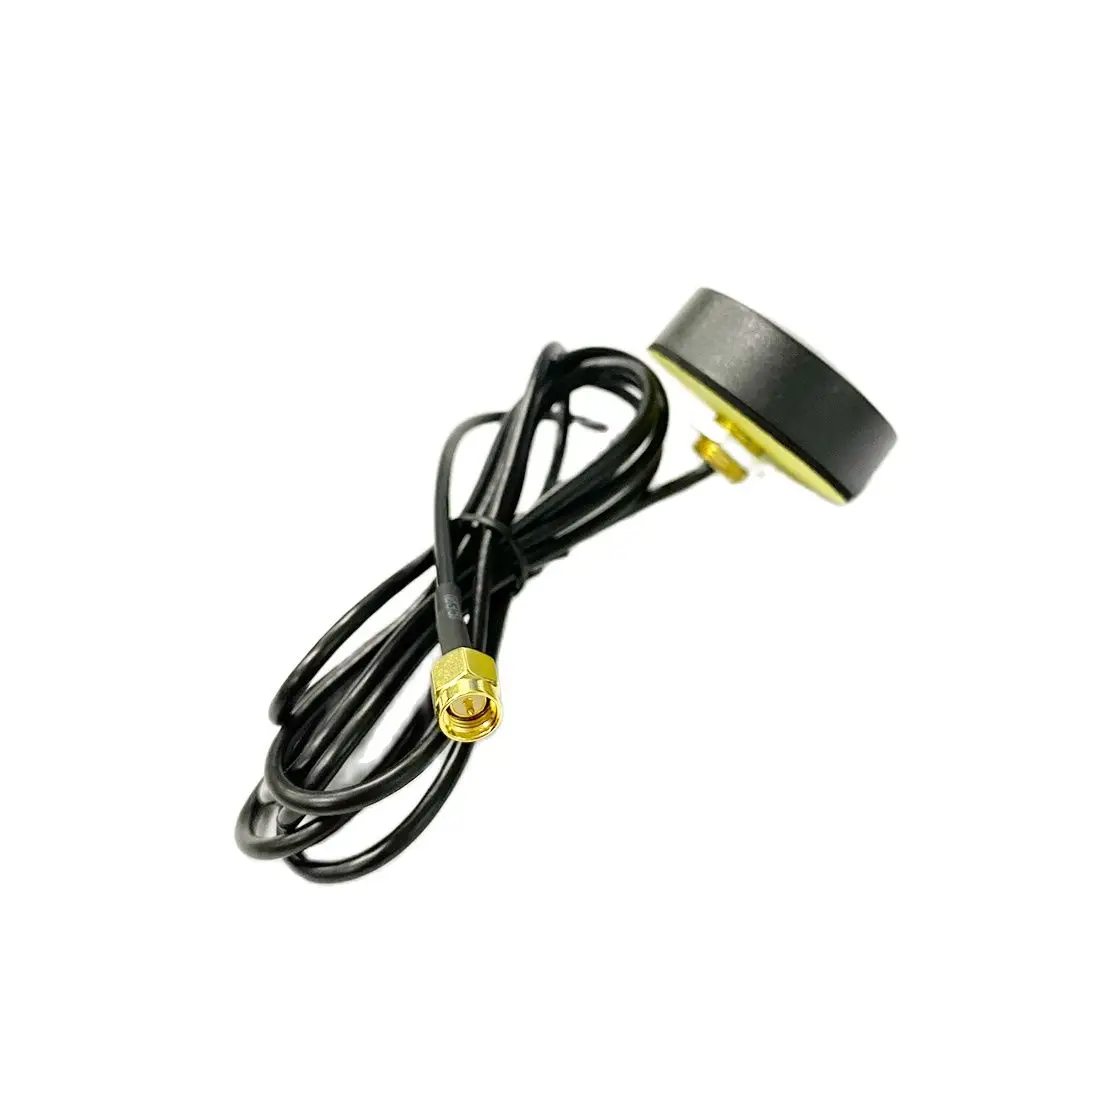 2.4Ghz WIFI antenna DTU Cabinet Aerial OMNI 3dbi Waterproof with 1.2m Extension Cable SMA Male Connector